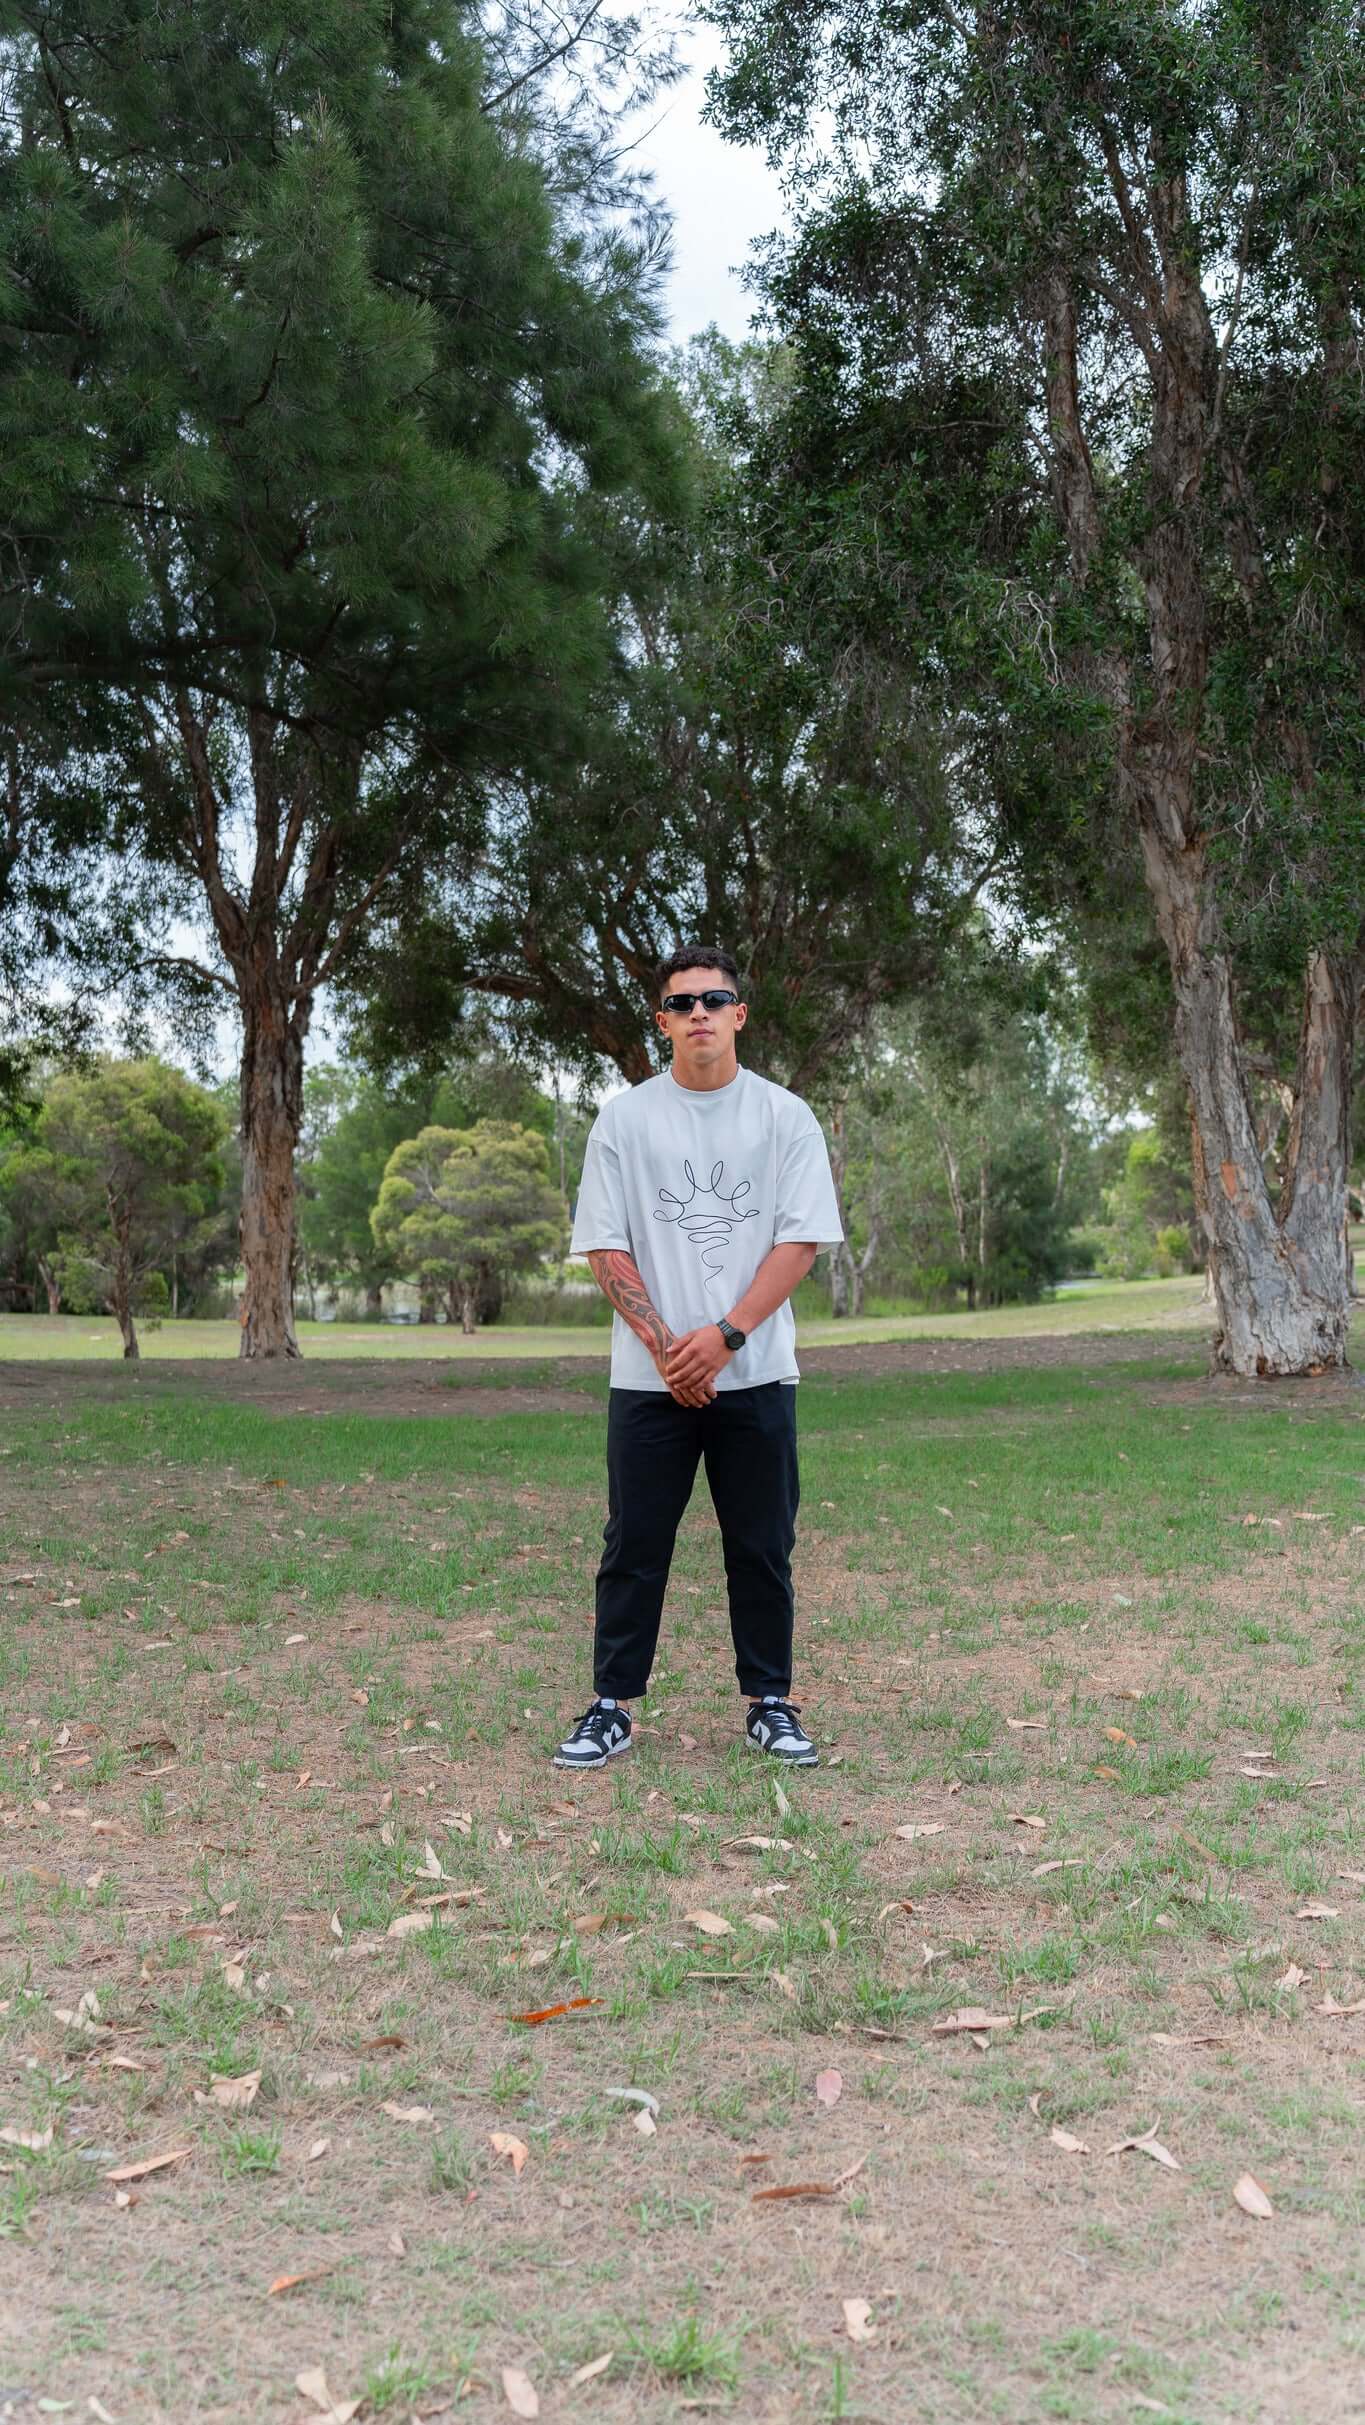 Male wearing white Tshirt, posing, standing in a park